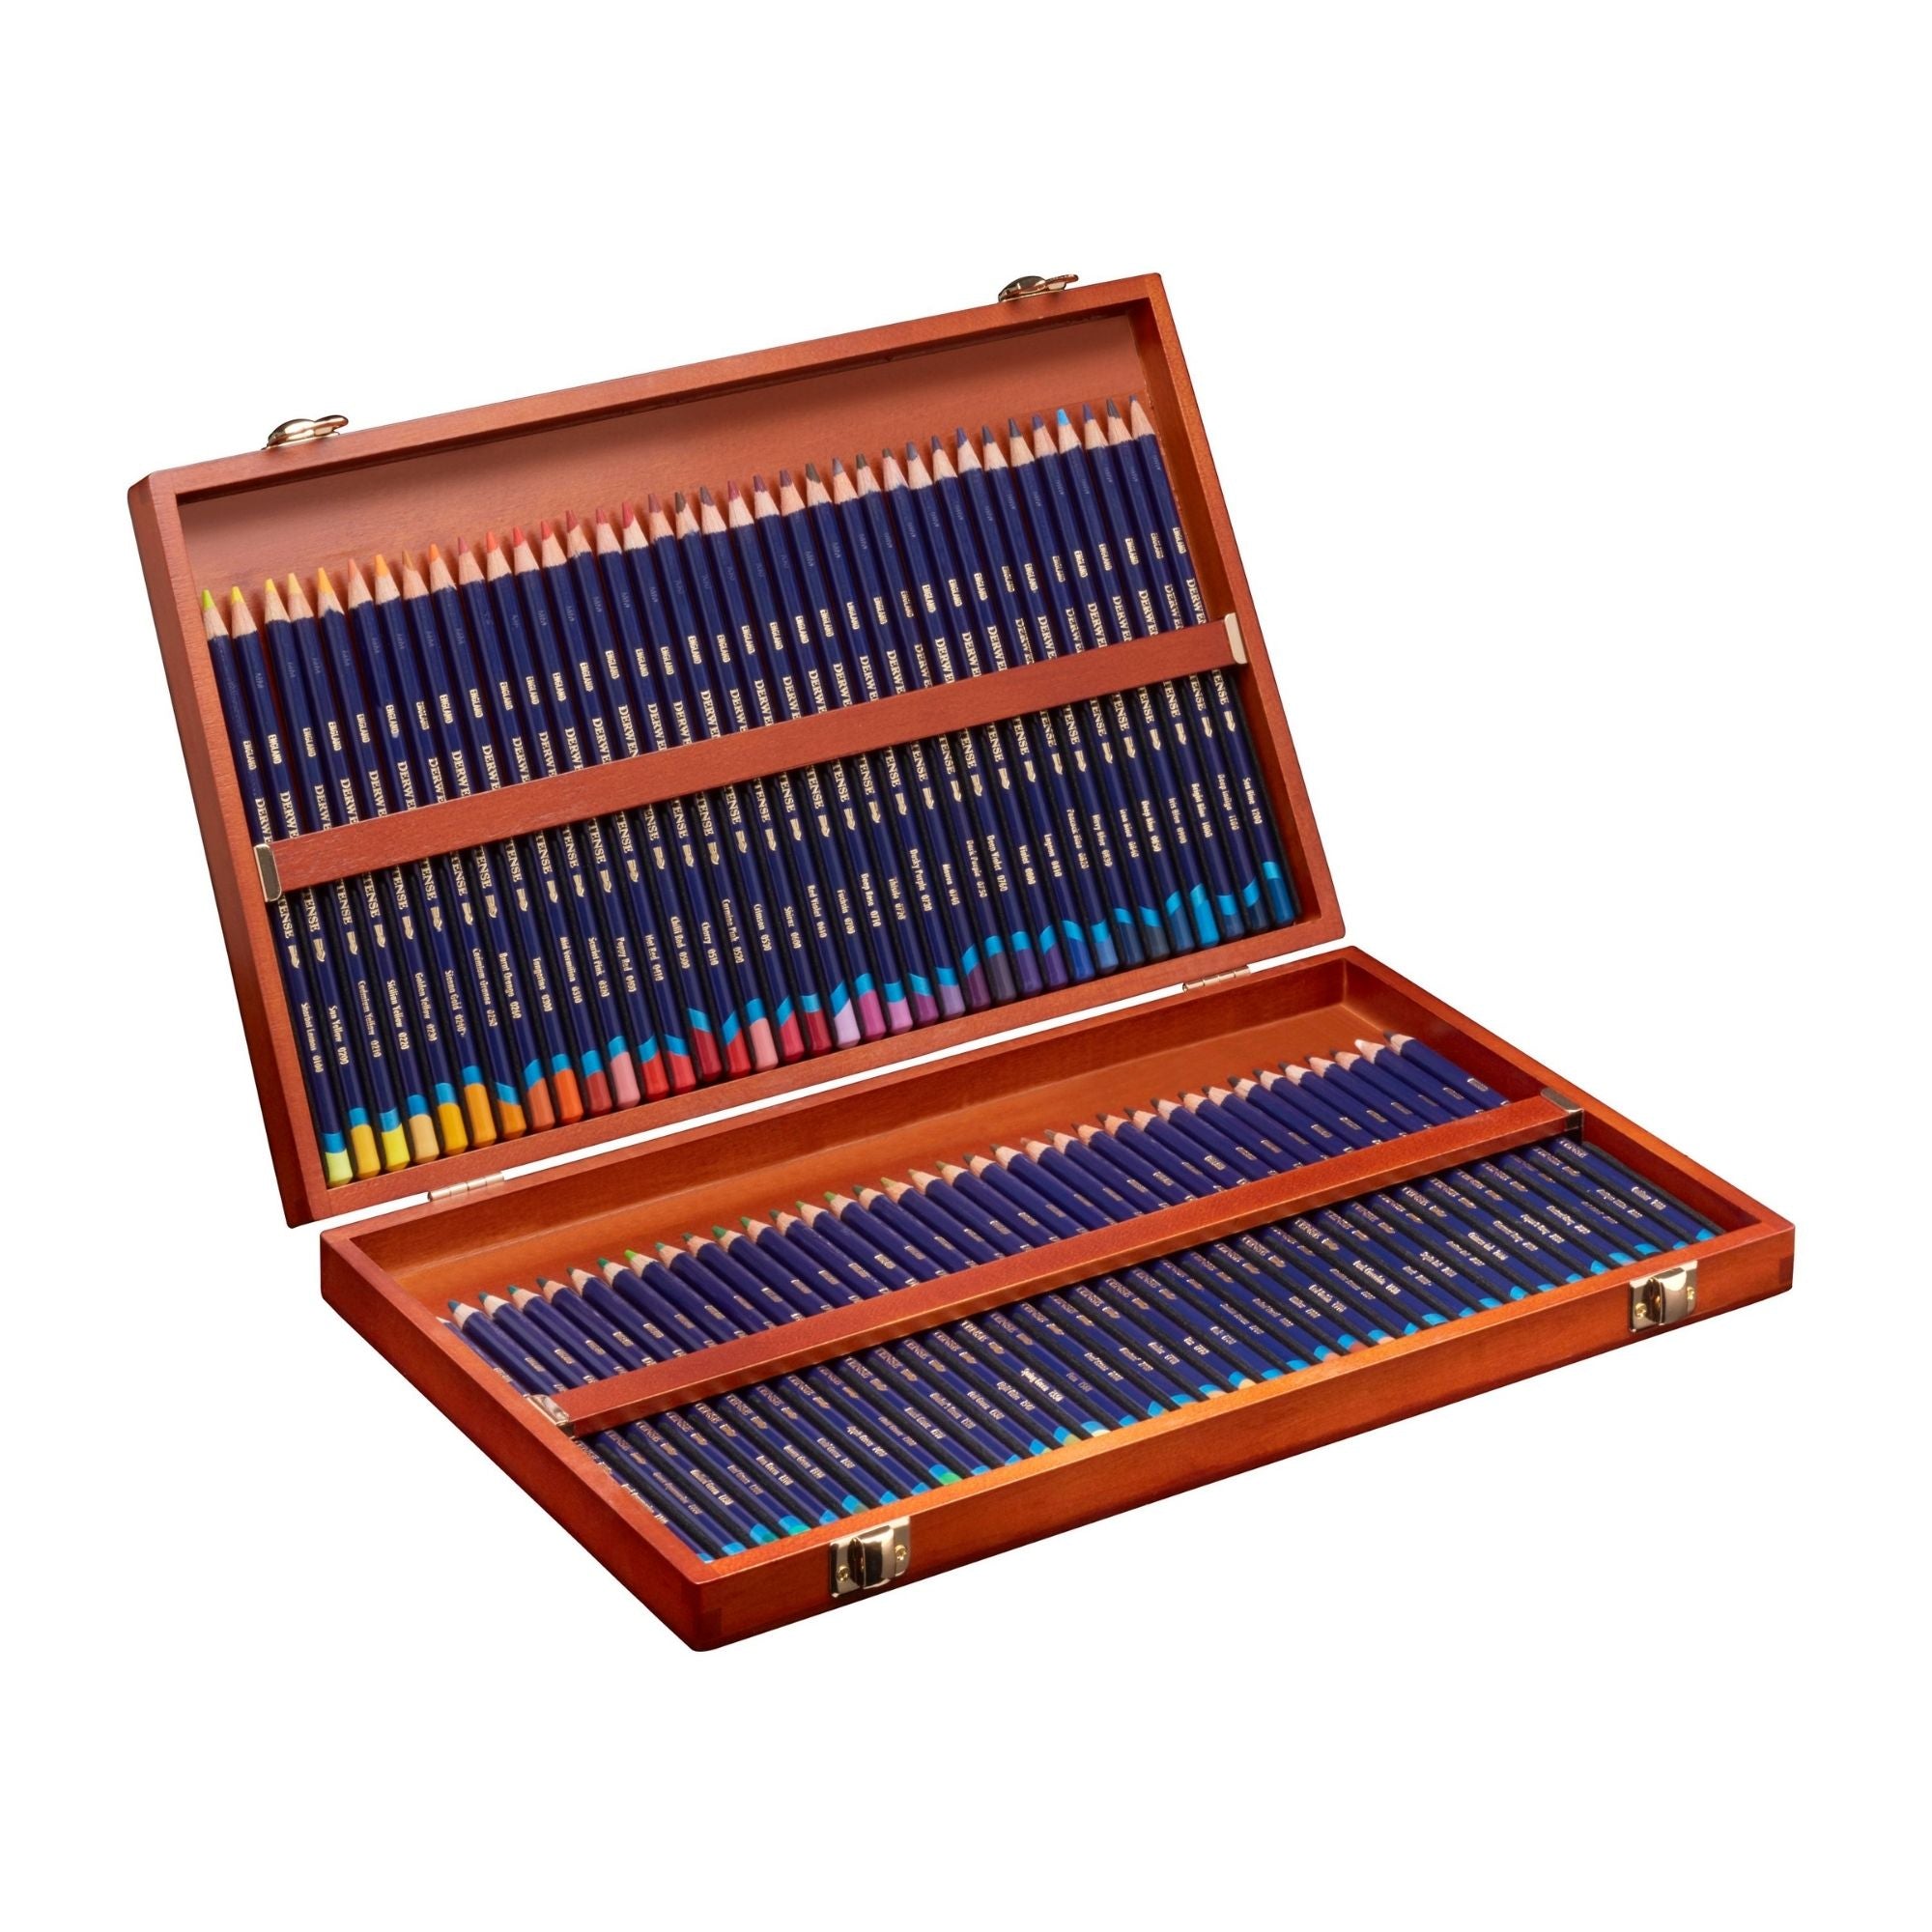 Derwent Inktense Pencils Wooden Box of 72- Includes Complimentary Artists Apron